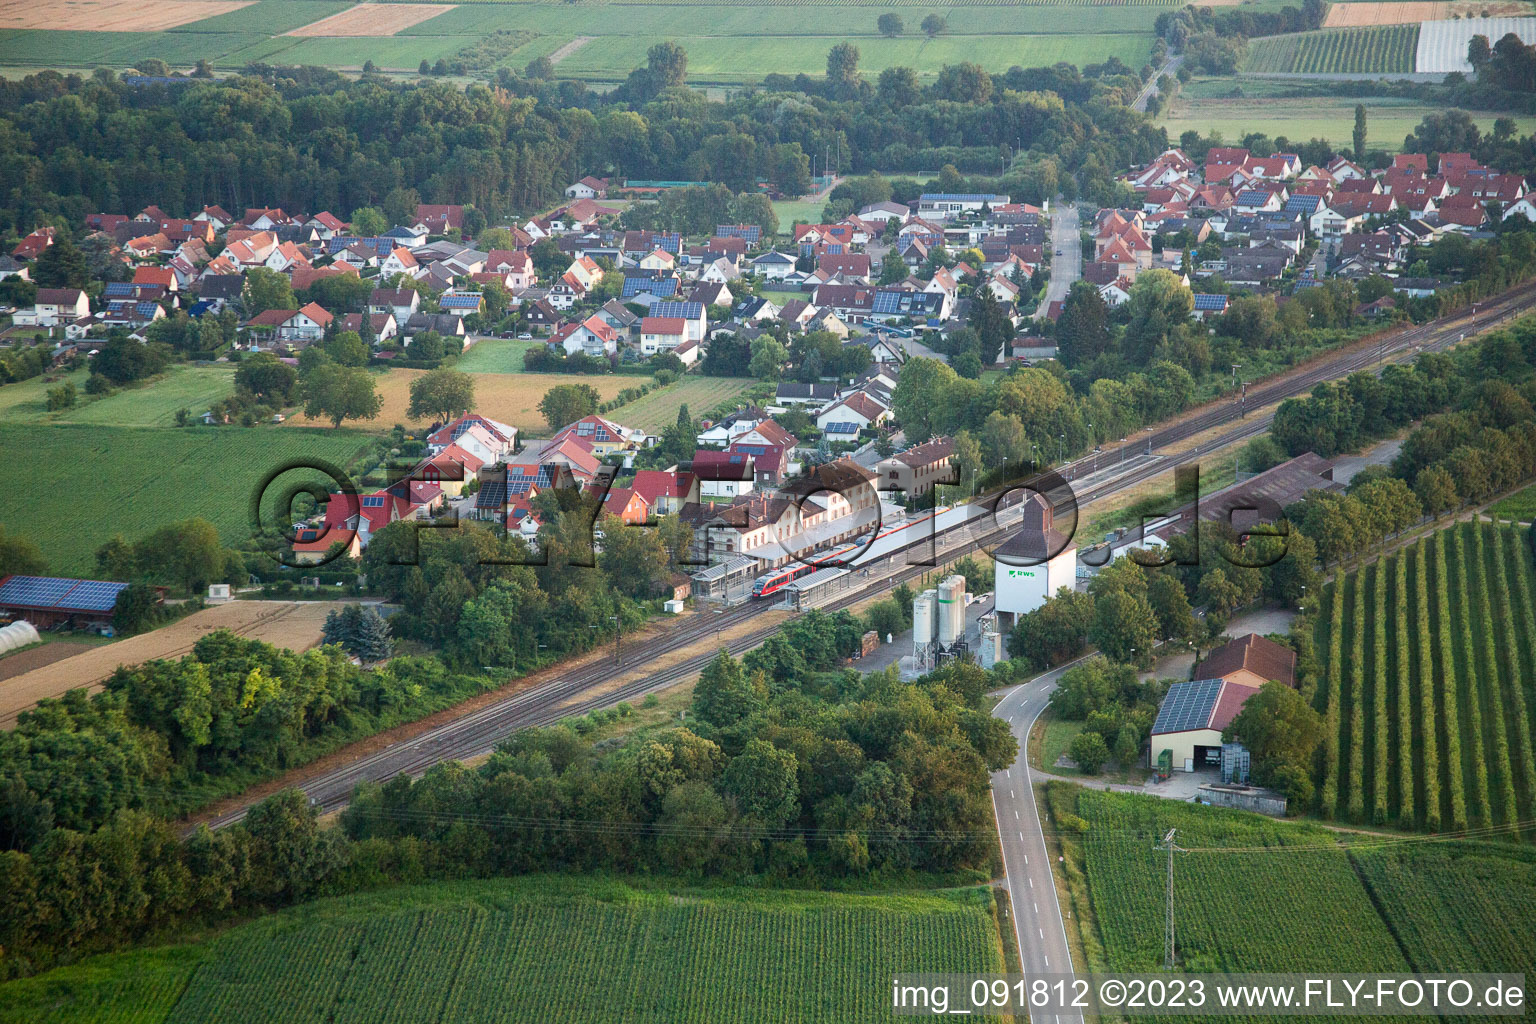 Drone image of Winden in the state Rhineland-Palatinate, Germany